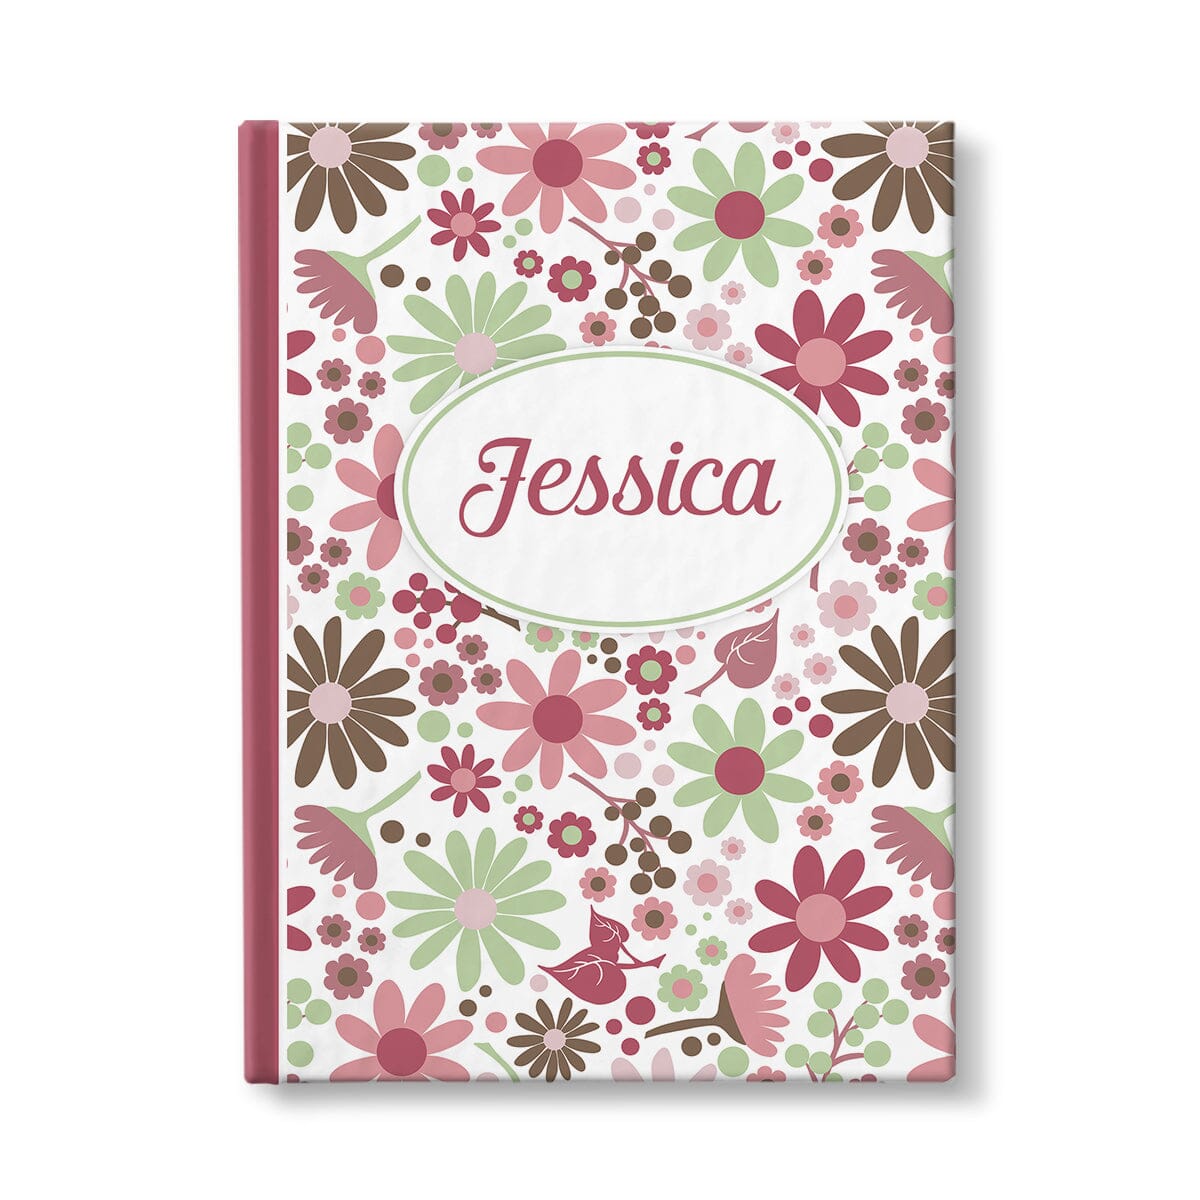 Personalized Berry Green Summer Flowers Journal at Artistically Invited.